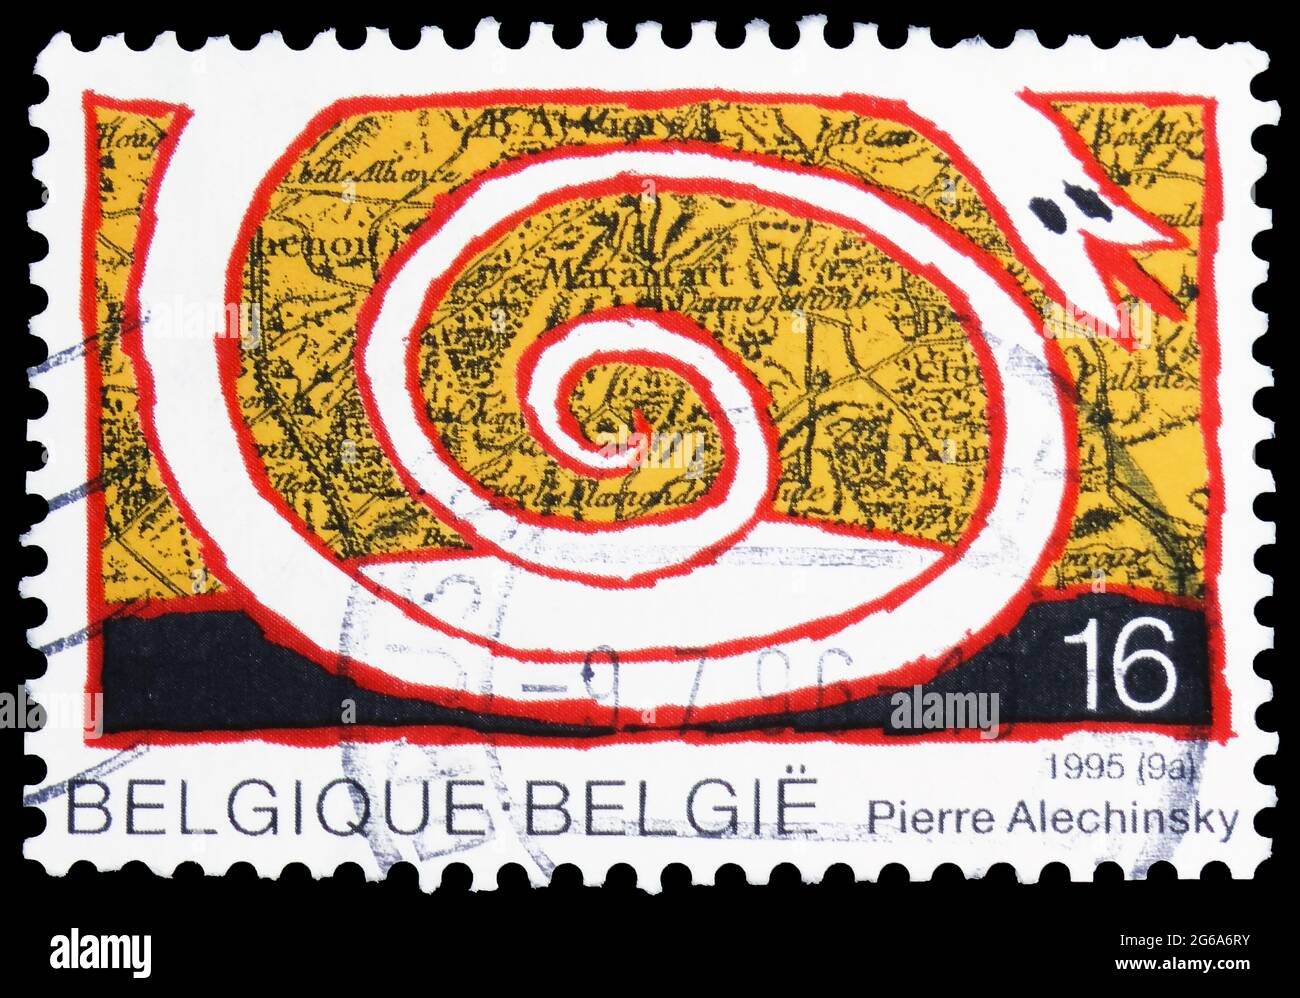 MOSCOW, RUSSIA - APRIL 18, 2020: Postage stamp printed in Belgium shows Arts by Pierre Alechinsky, serie, circa 1995 Stock Photo